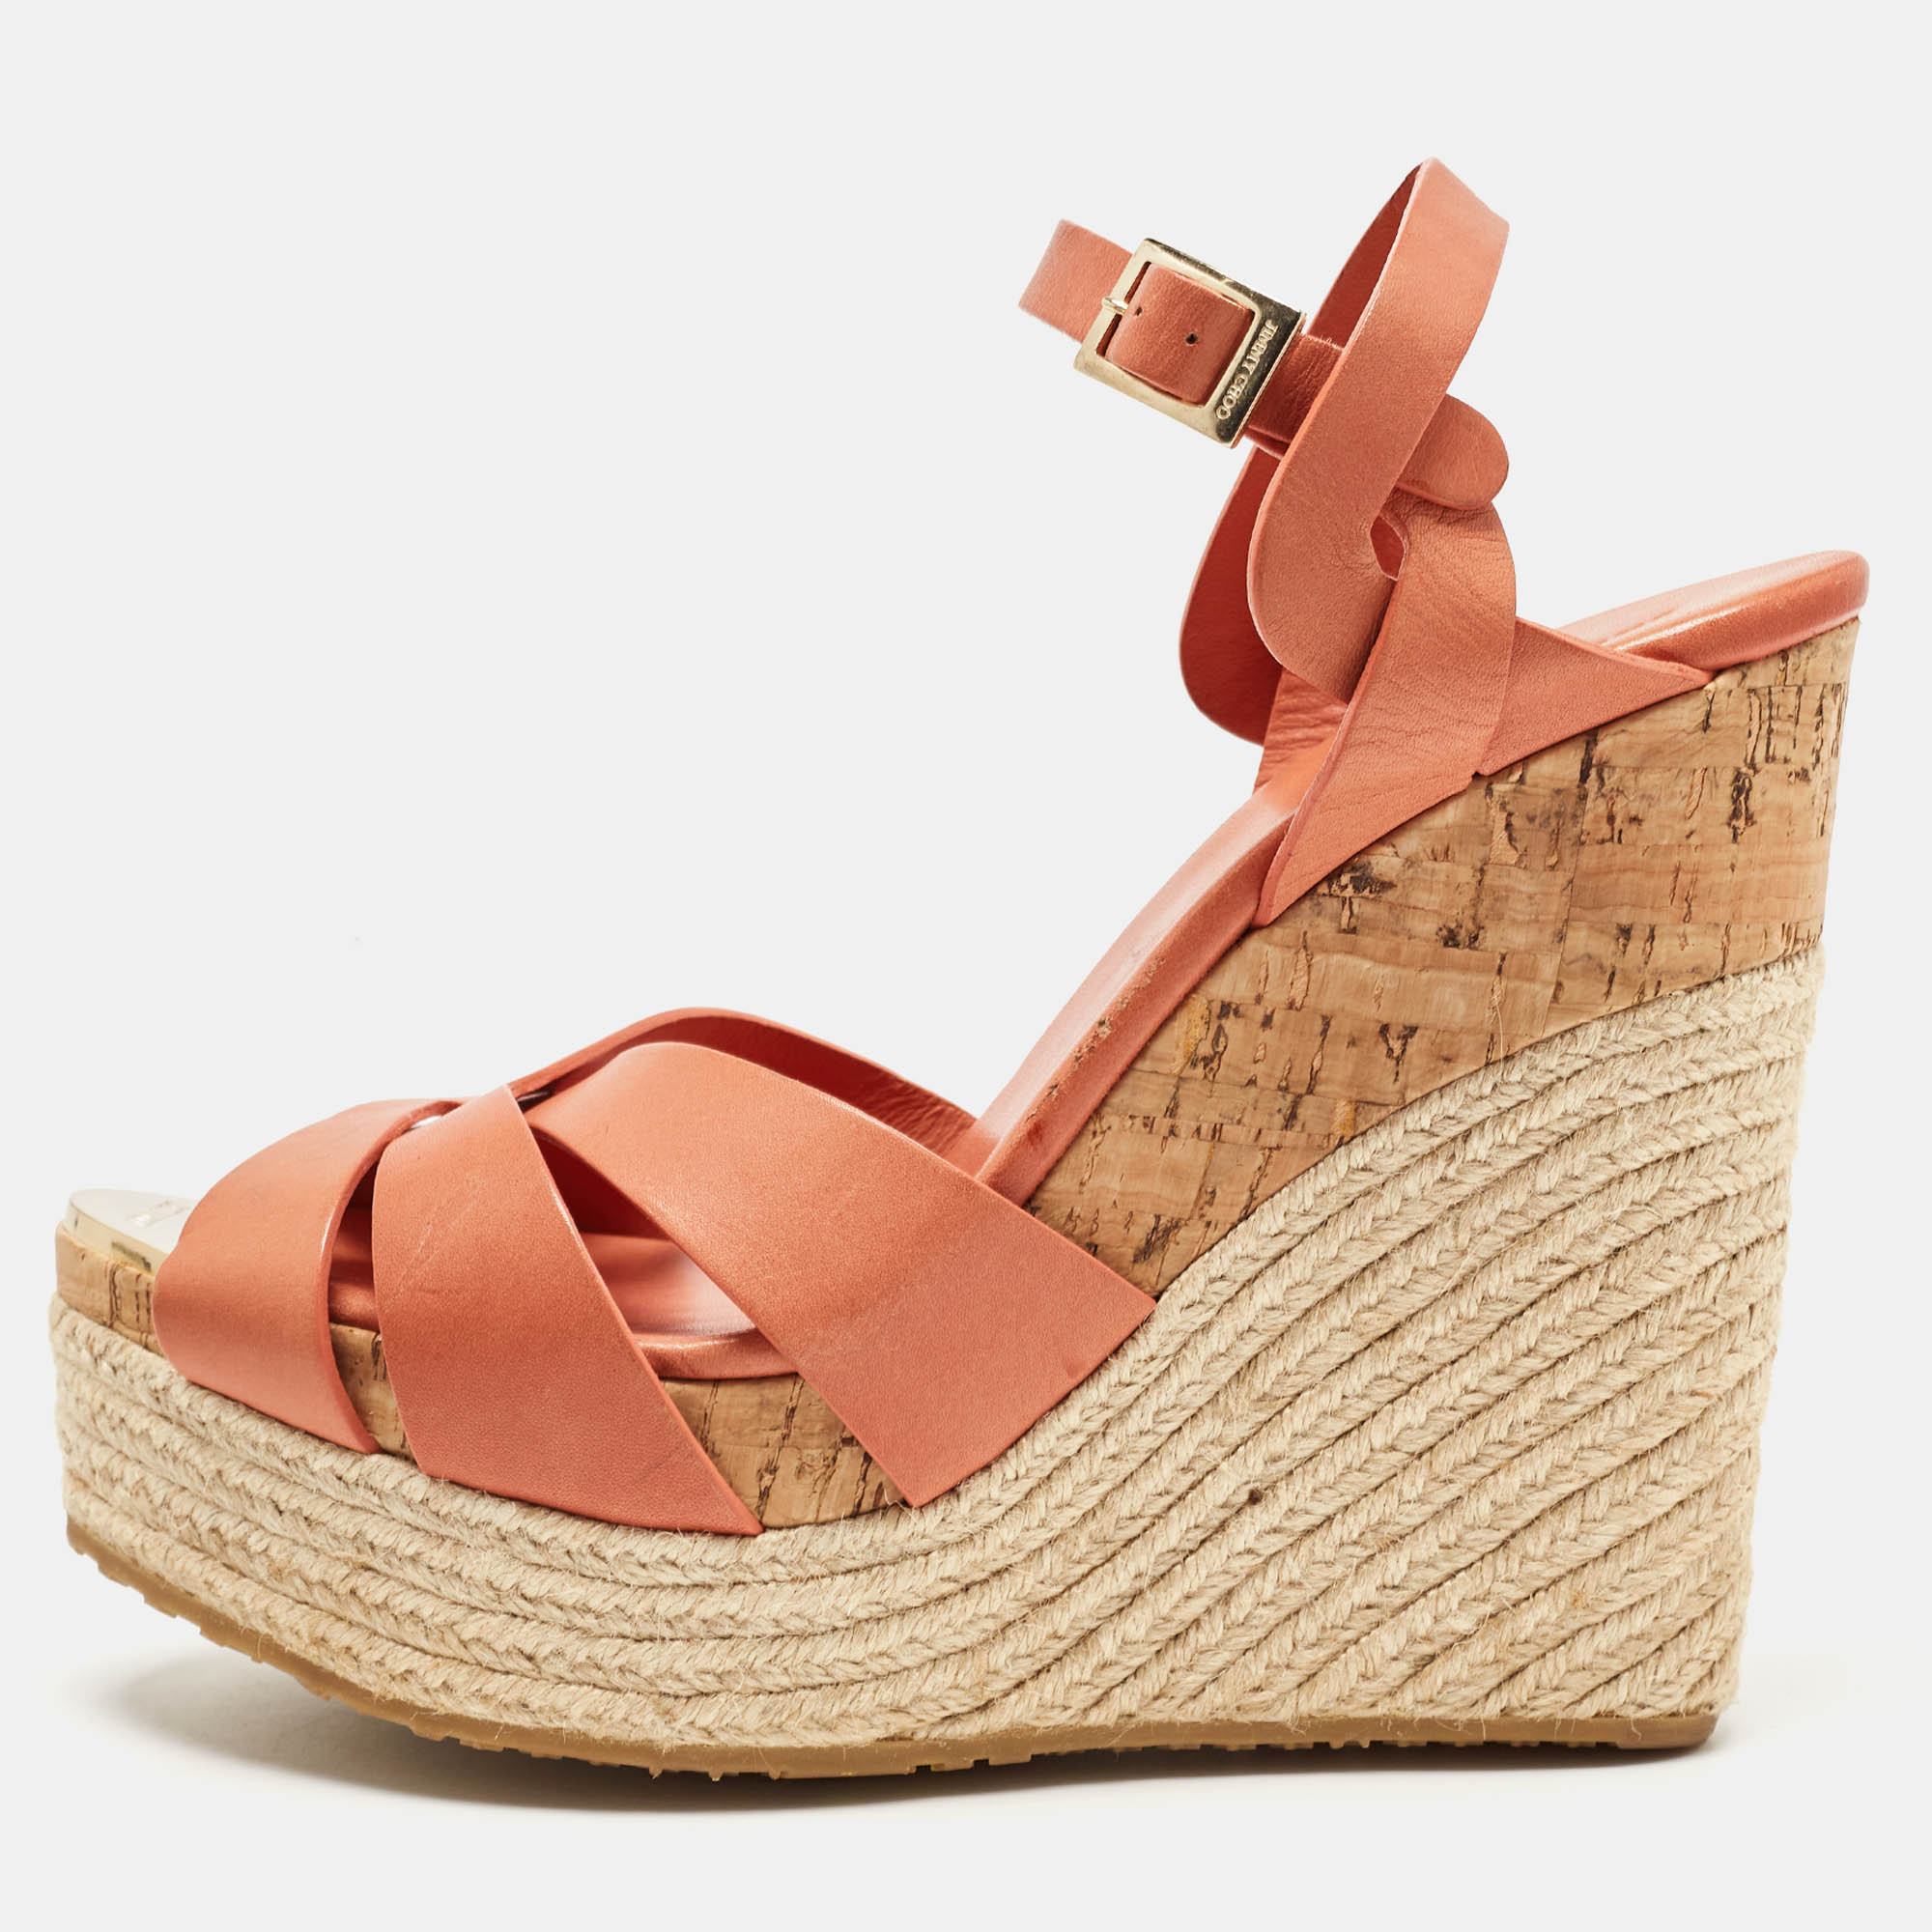 Perfectly sewn and finished to ensure an elegant look and fit these Jimmy Choo wedge shoes are a purchase youll love flaunting. They look great on the feet.